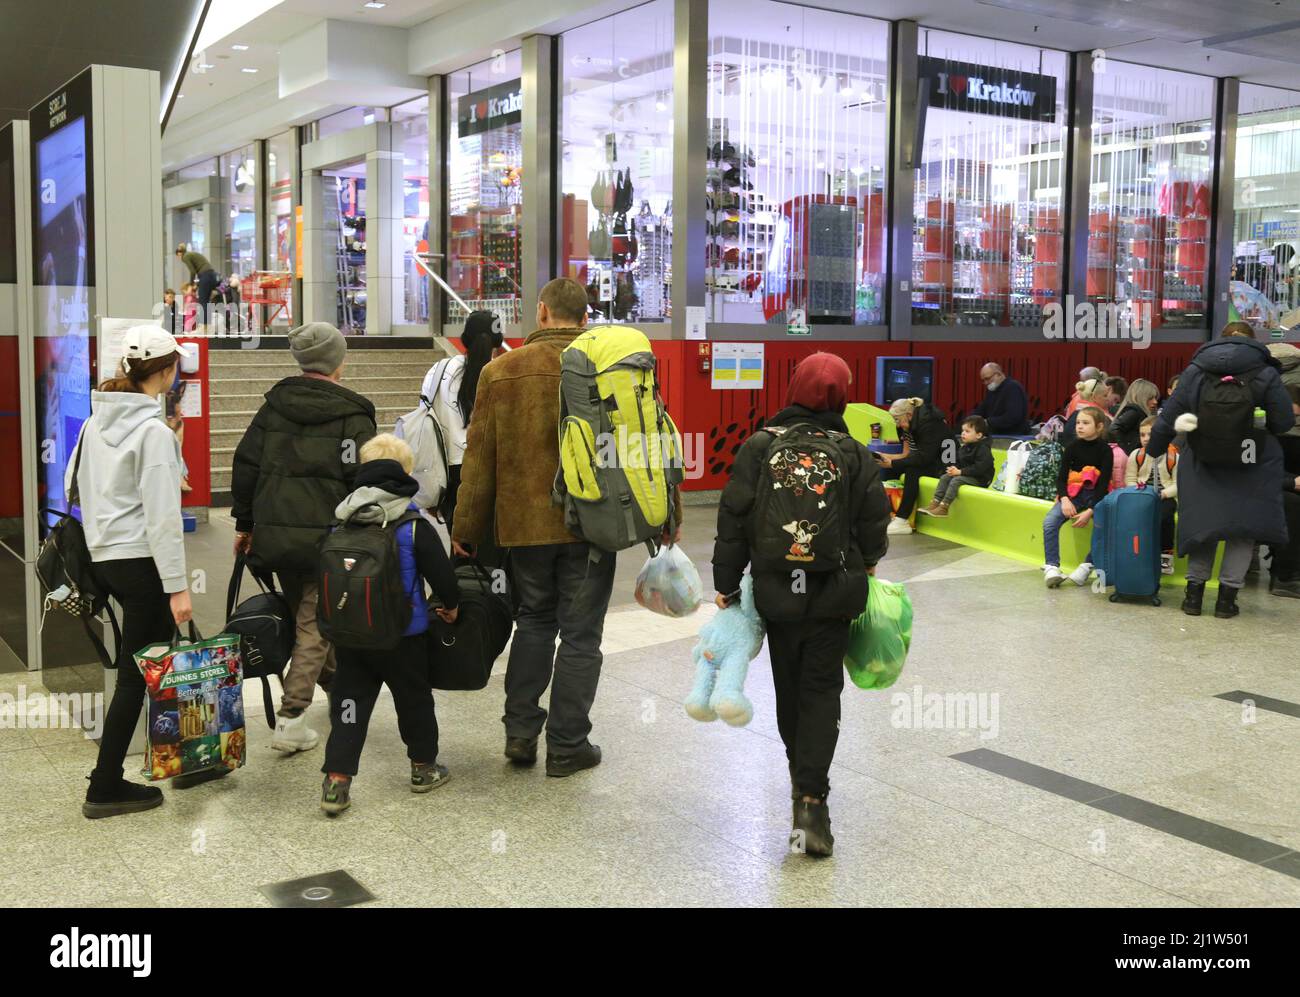 Cracow. Krakow. Poland. Ukrainian refugees, most of them women and children at main railway station. Stock Photo